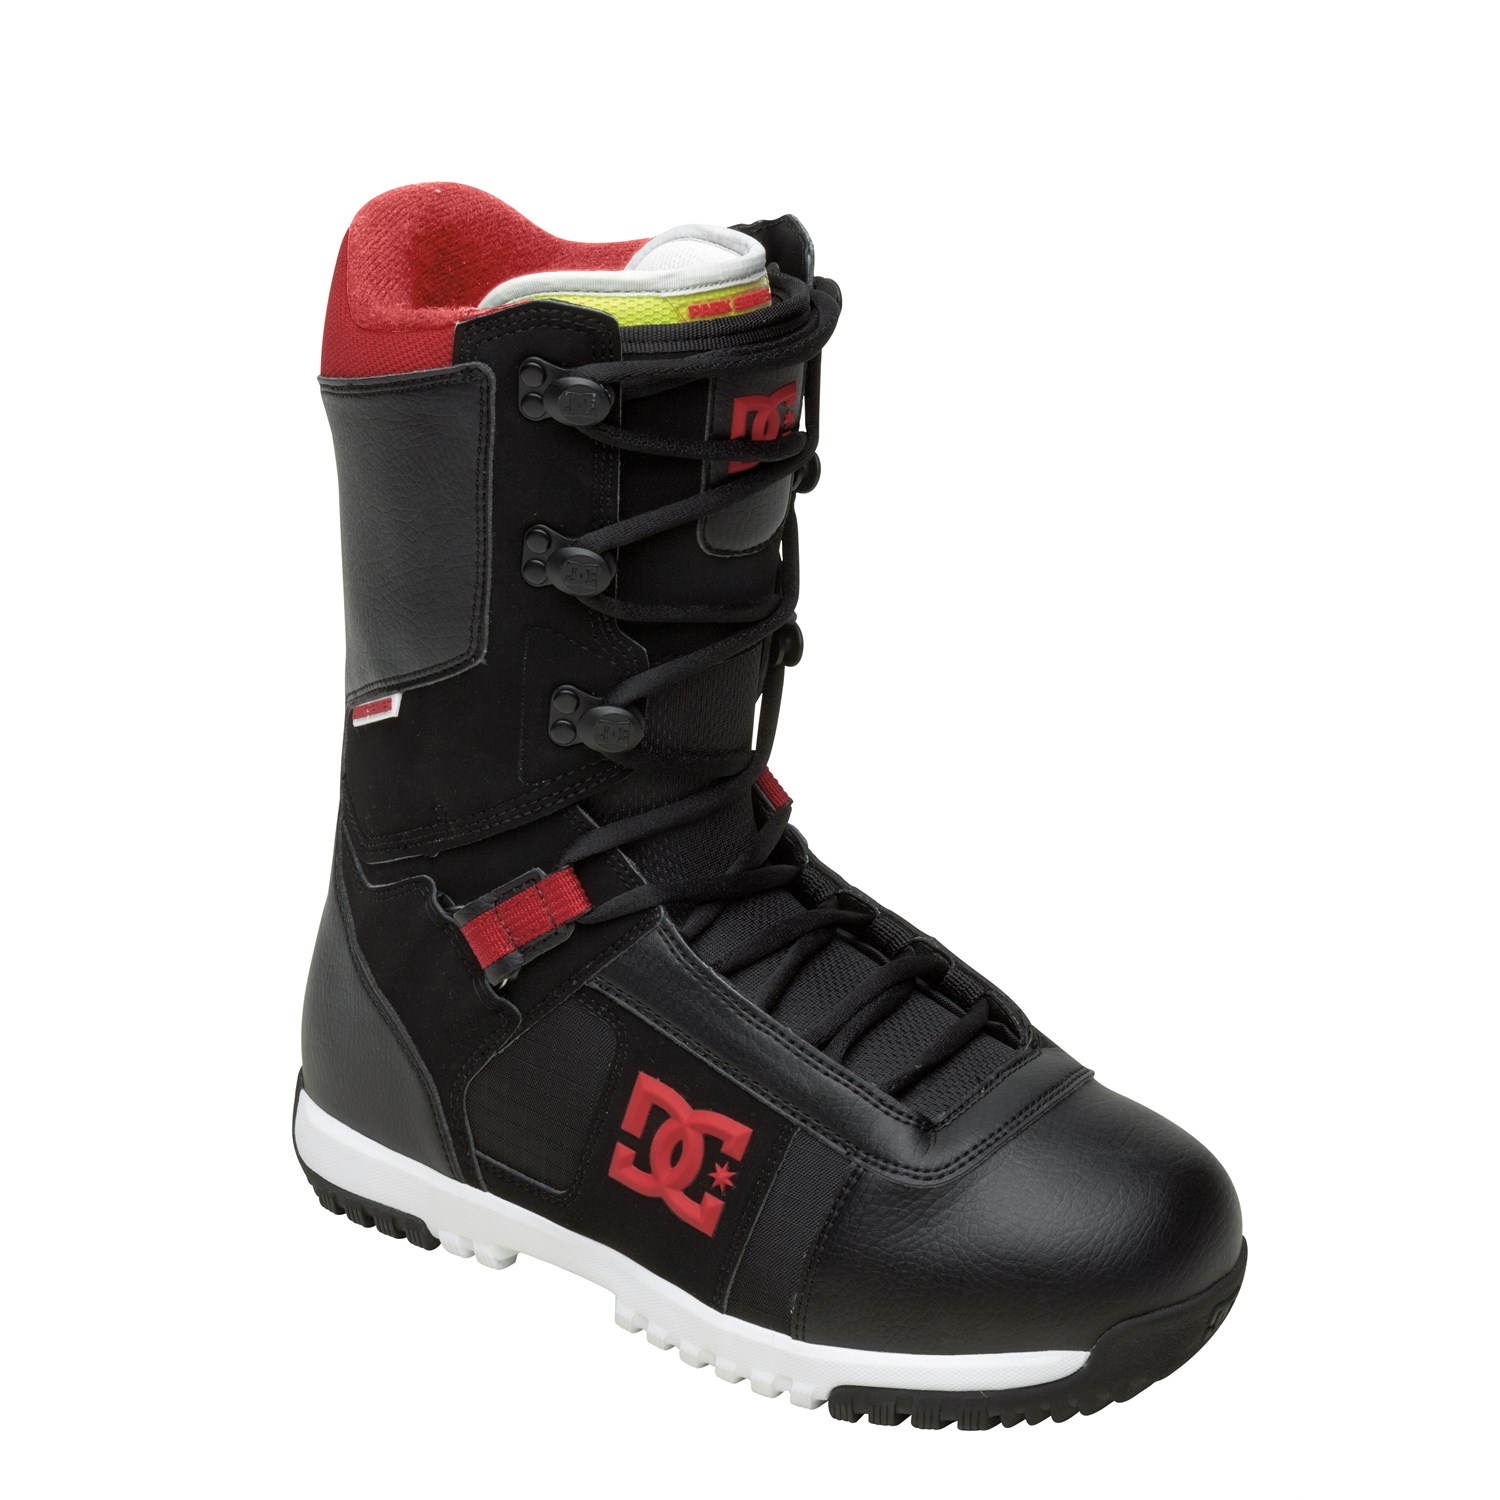 Buy > park snowboard boots > in stock